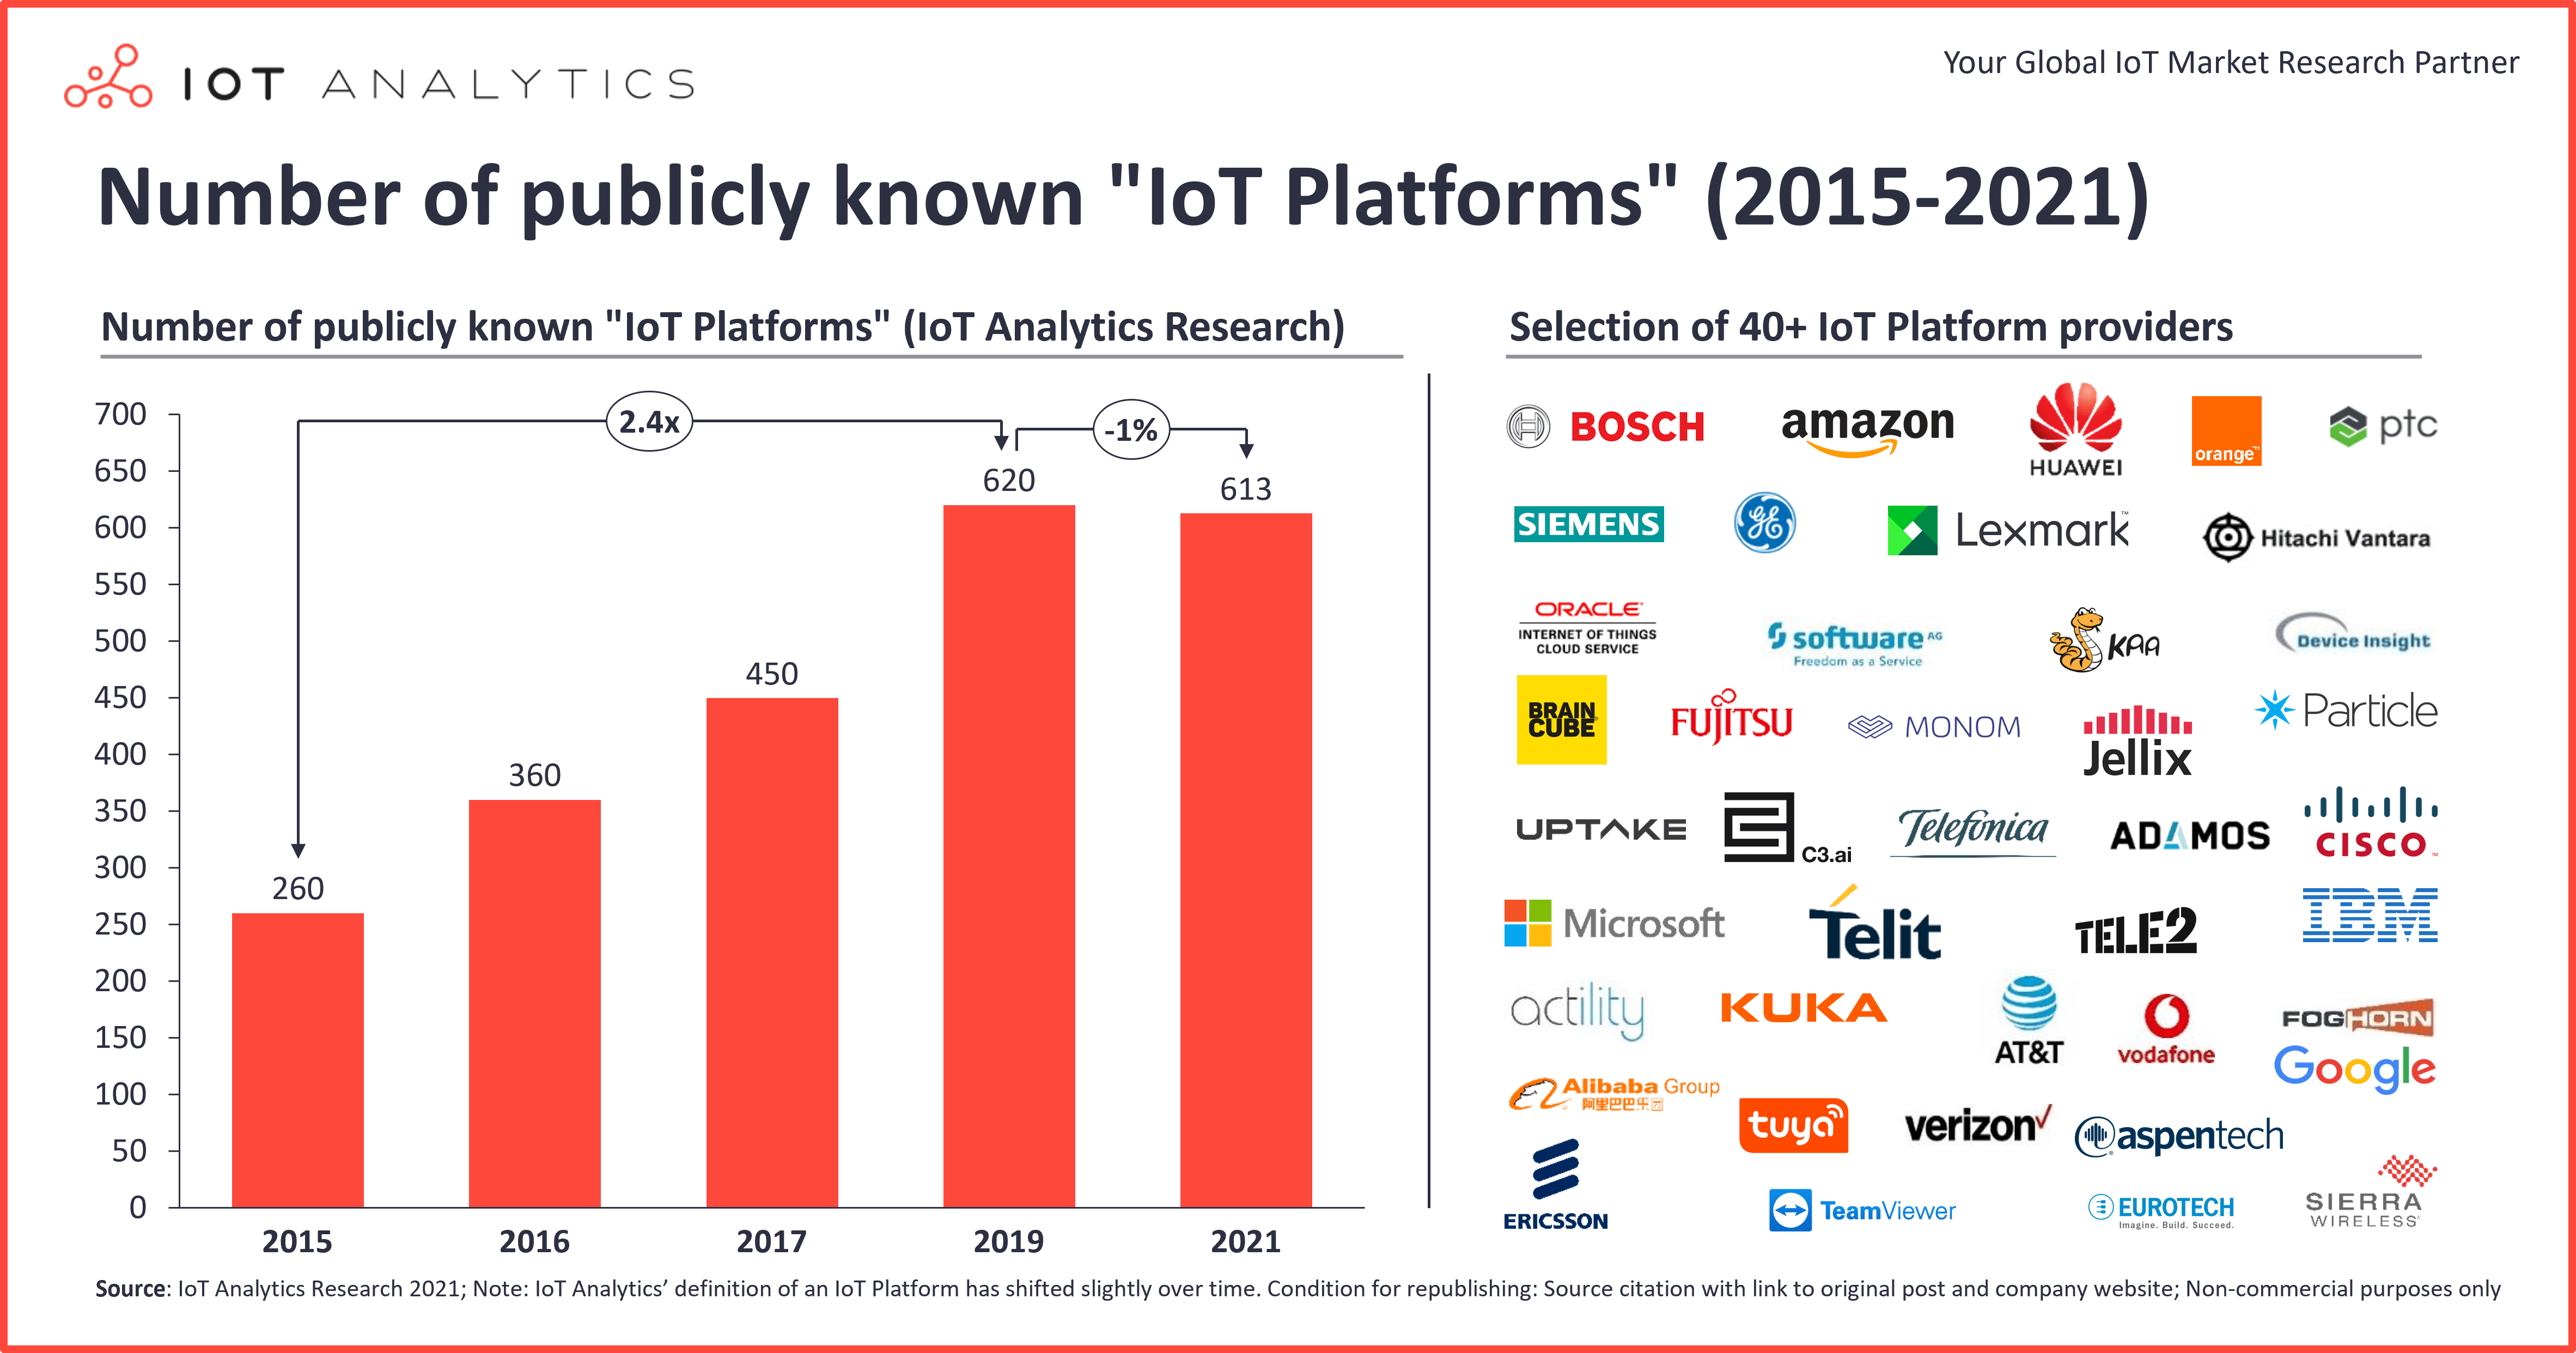 Number of publicly known IoT Platforms 2015-2021